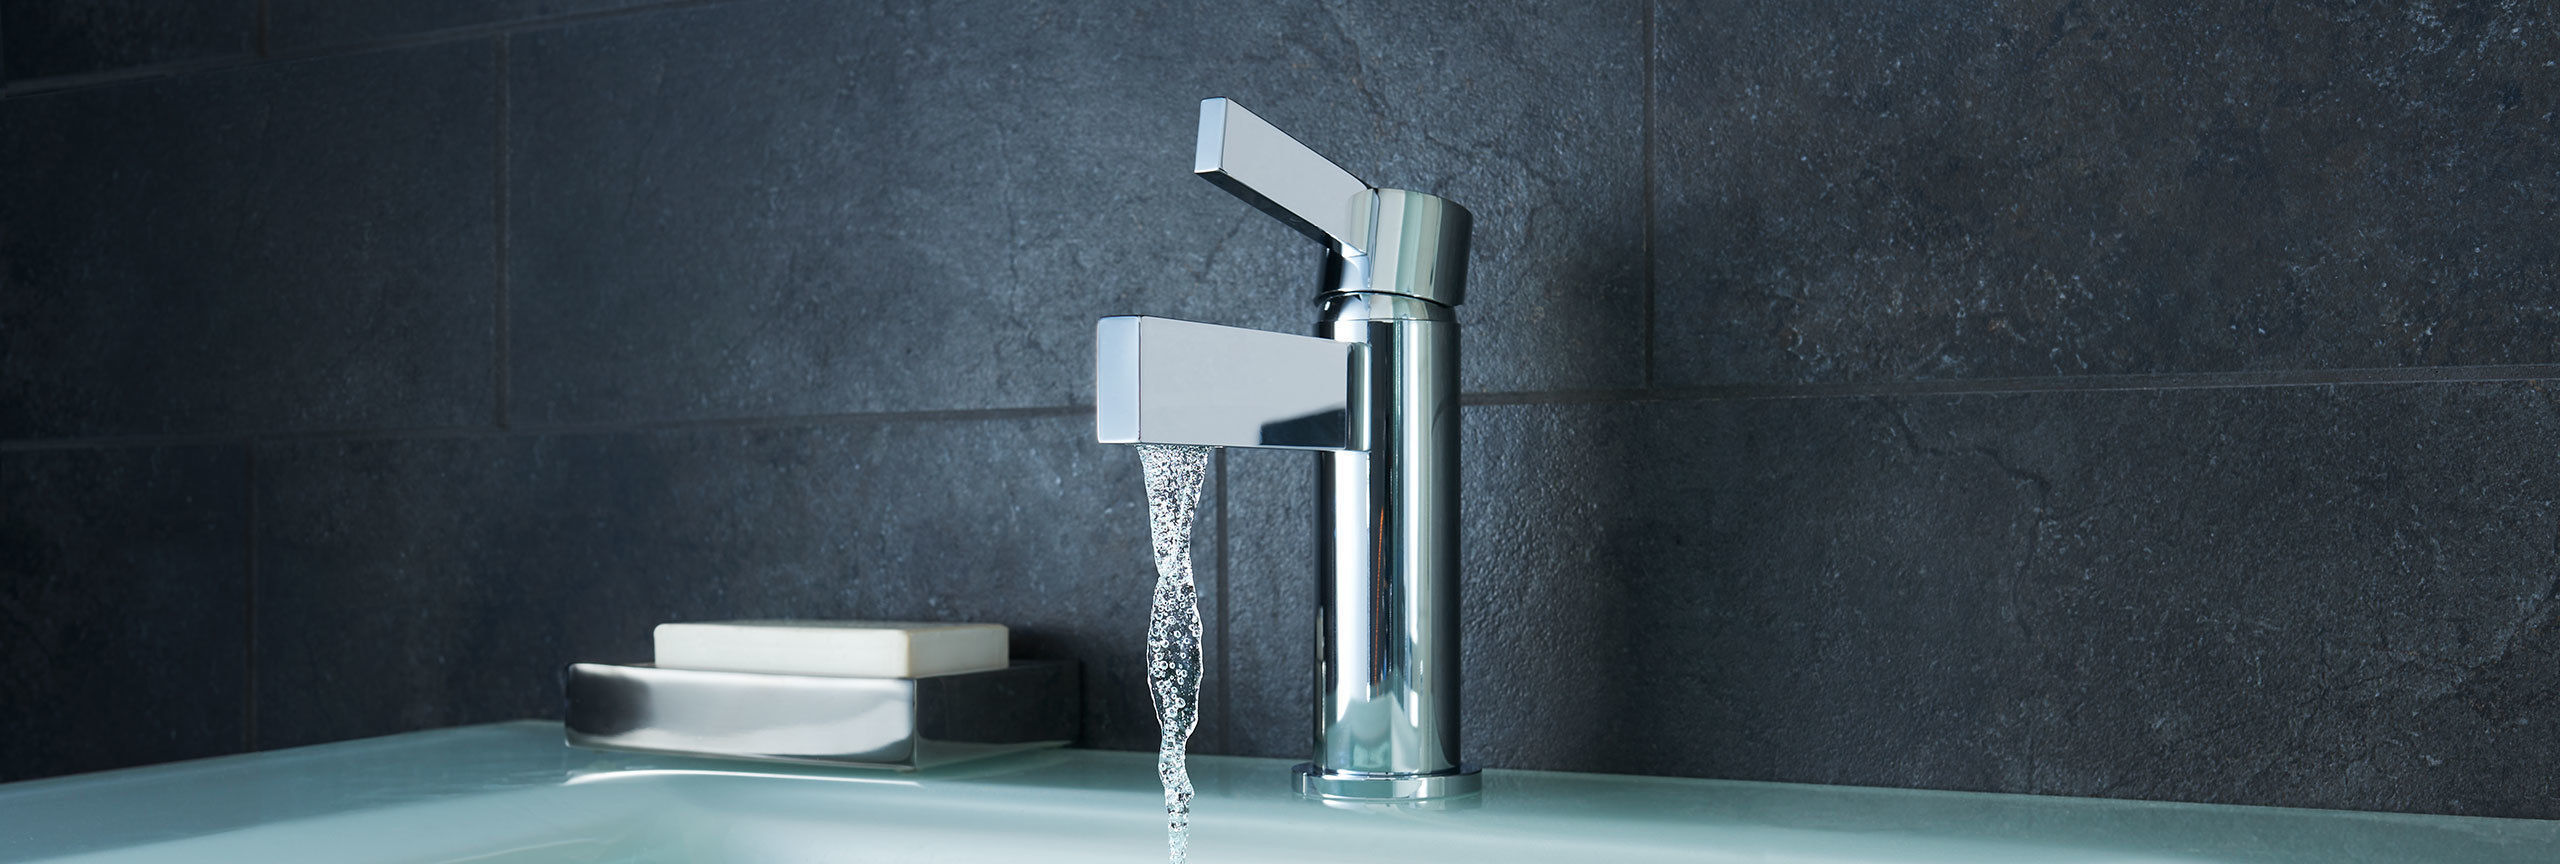 bathroom series Bel Canto single hole faucet with running water